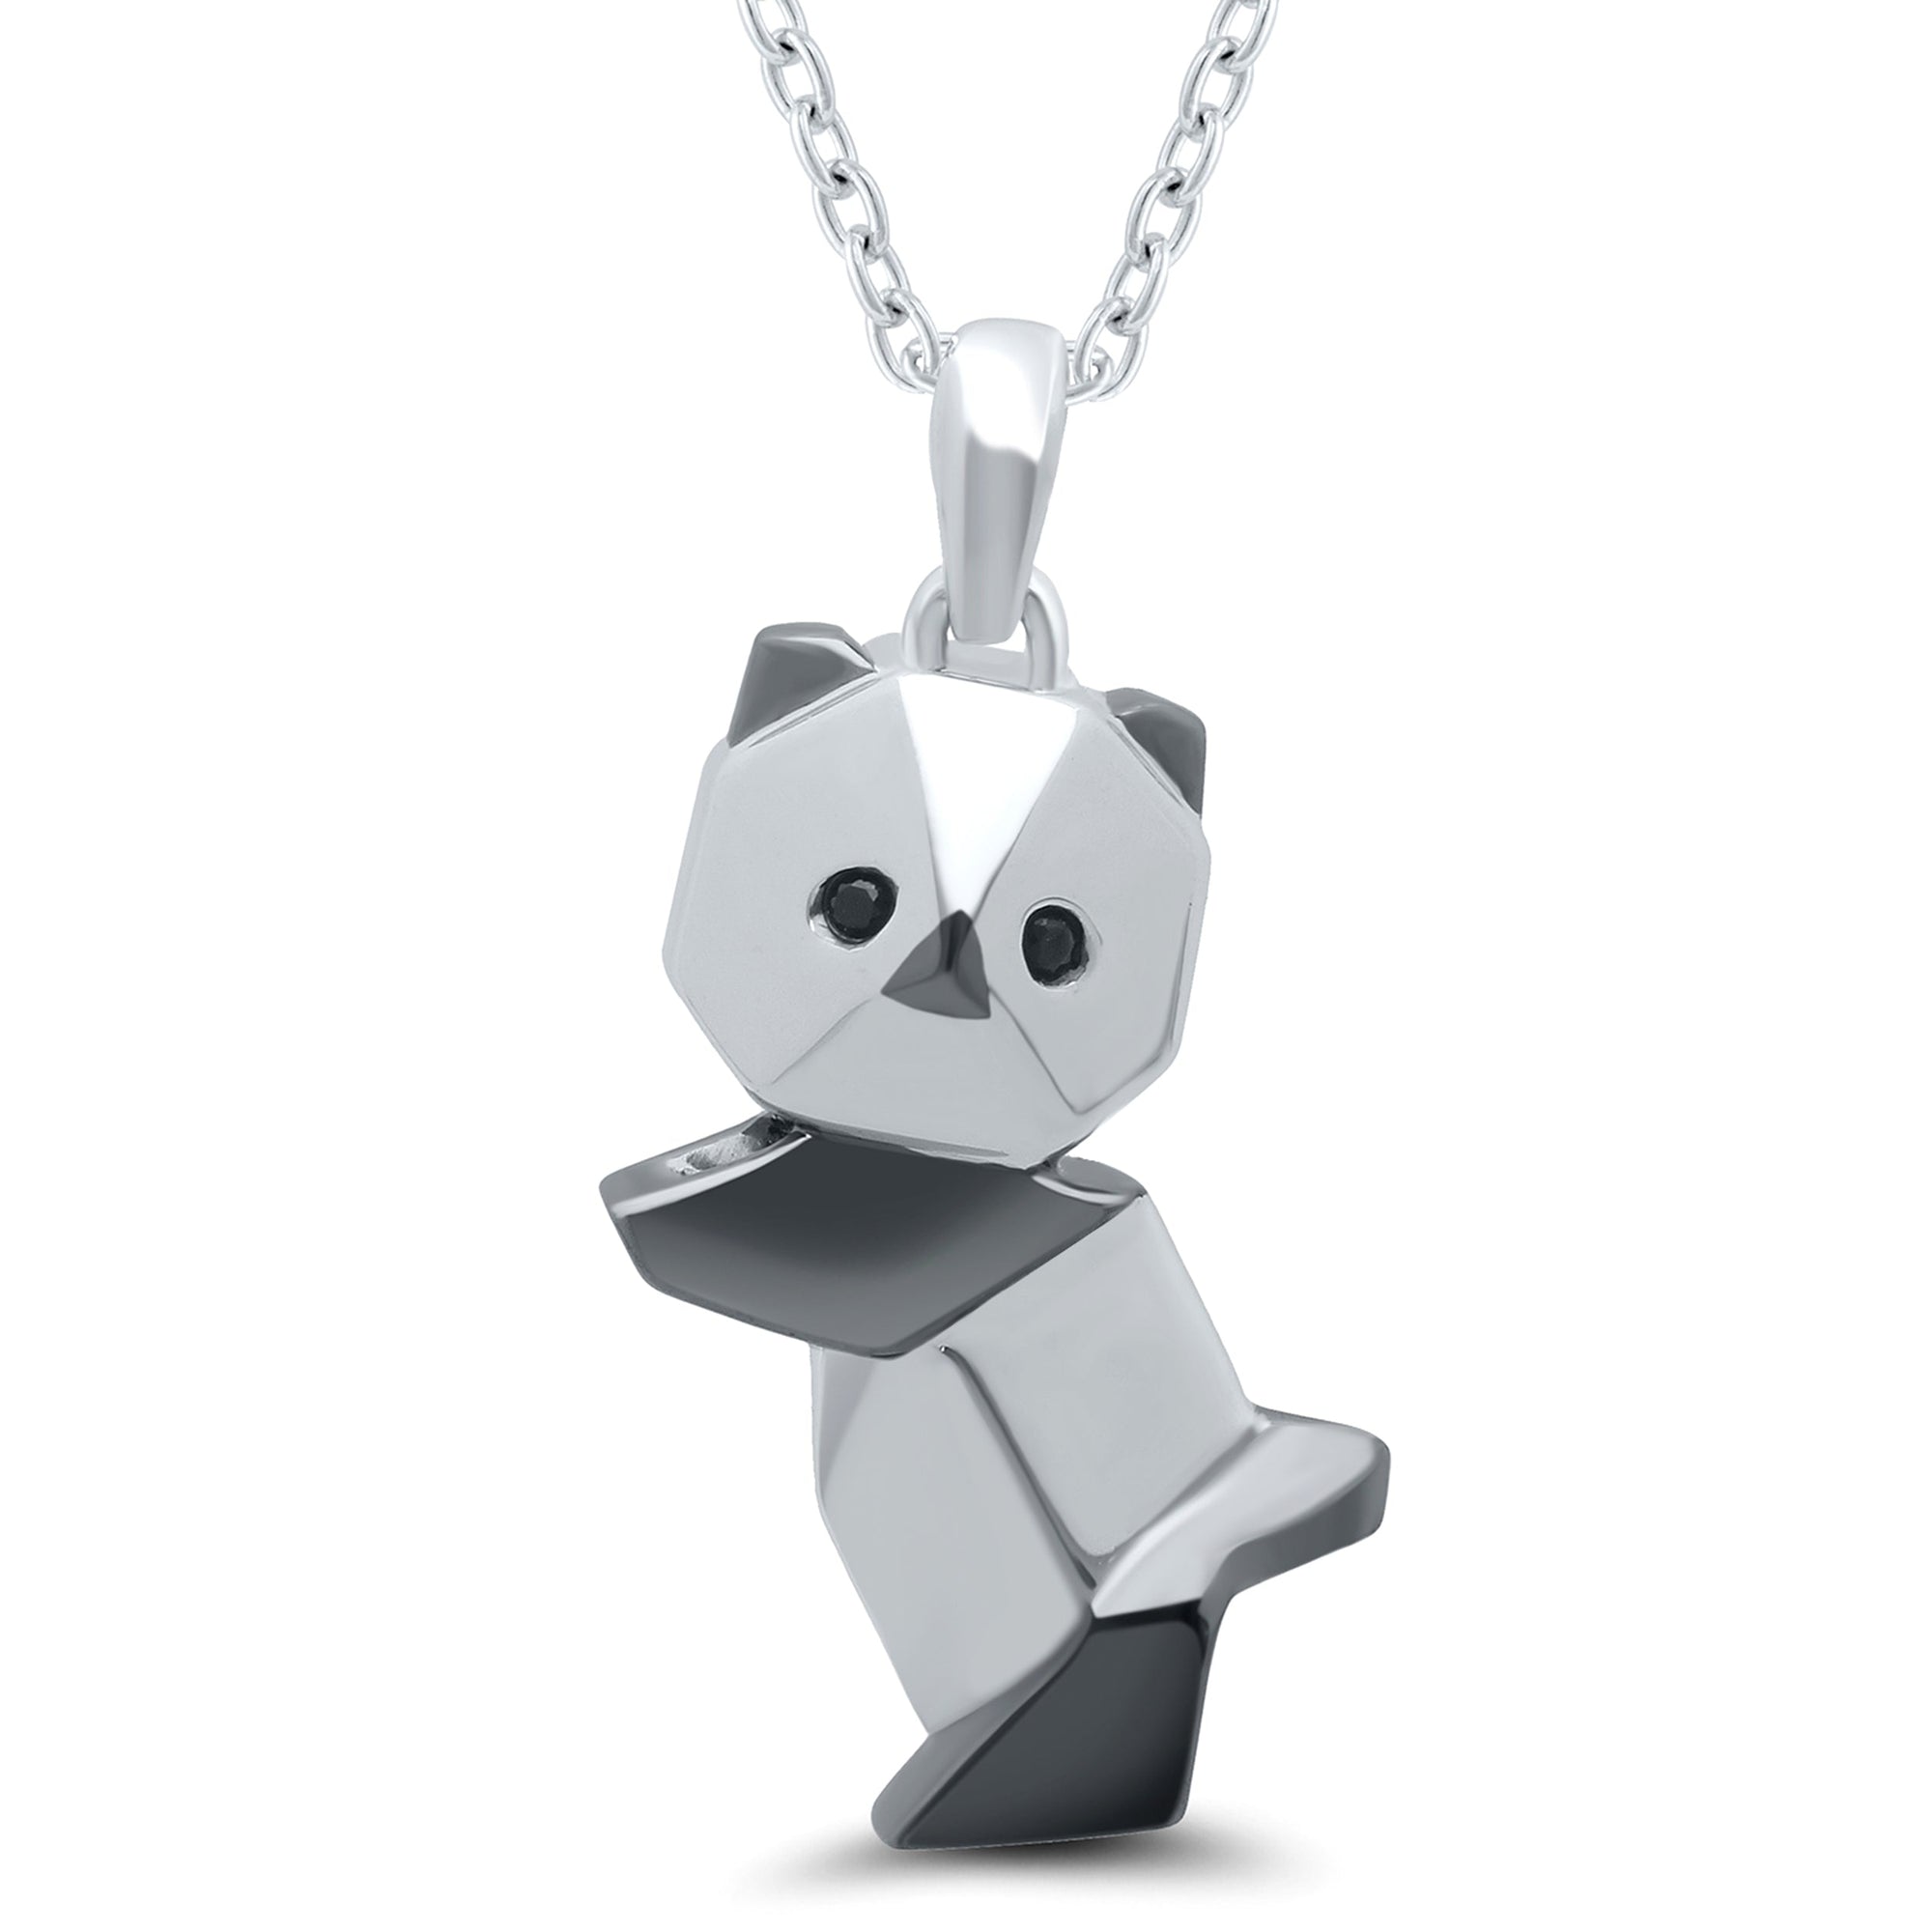 Silver Bear Necklace, Teddy Bear Charm Pendant, Crystal Bear Animal Necklace,  Silver Chain Necklace WATERPROOF Jewelry Her Him His Girl Gift